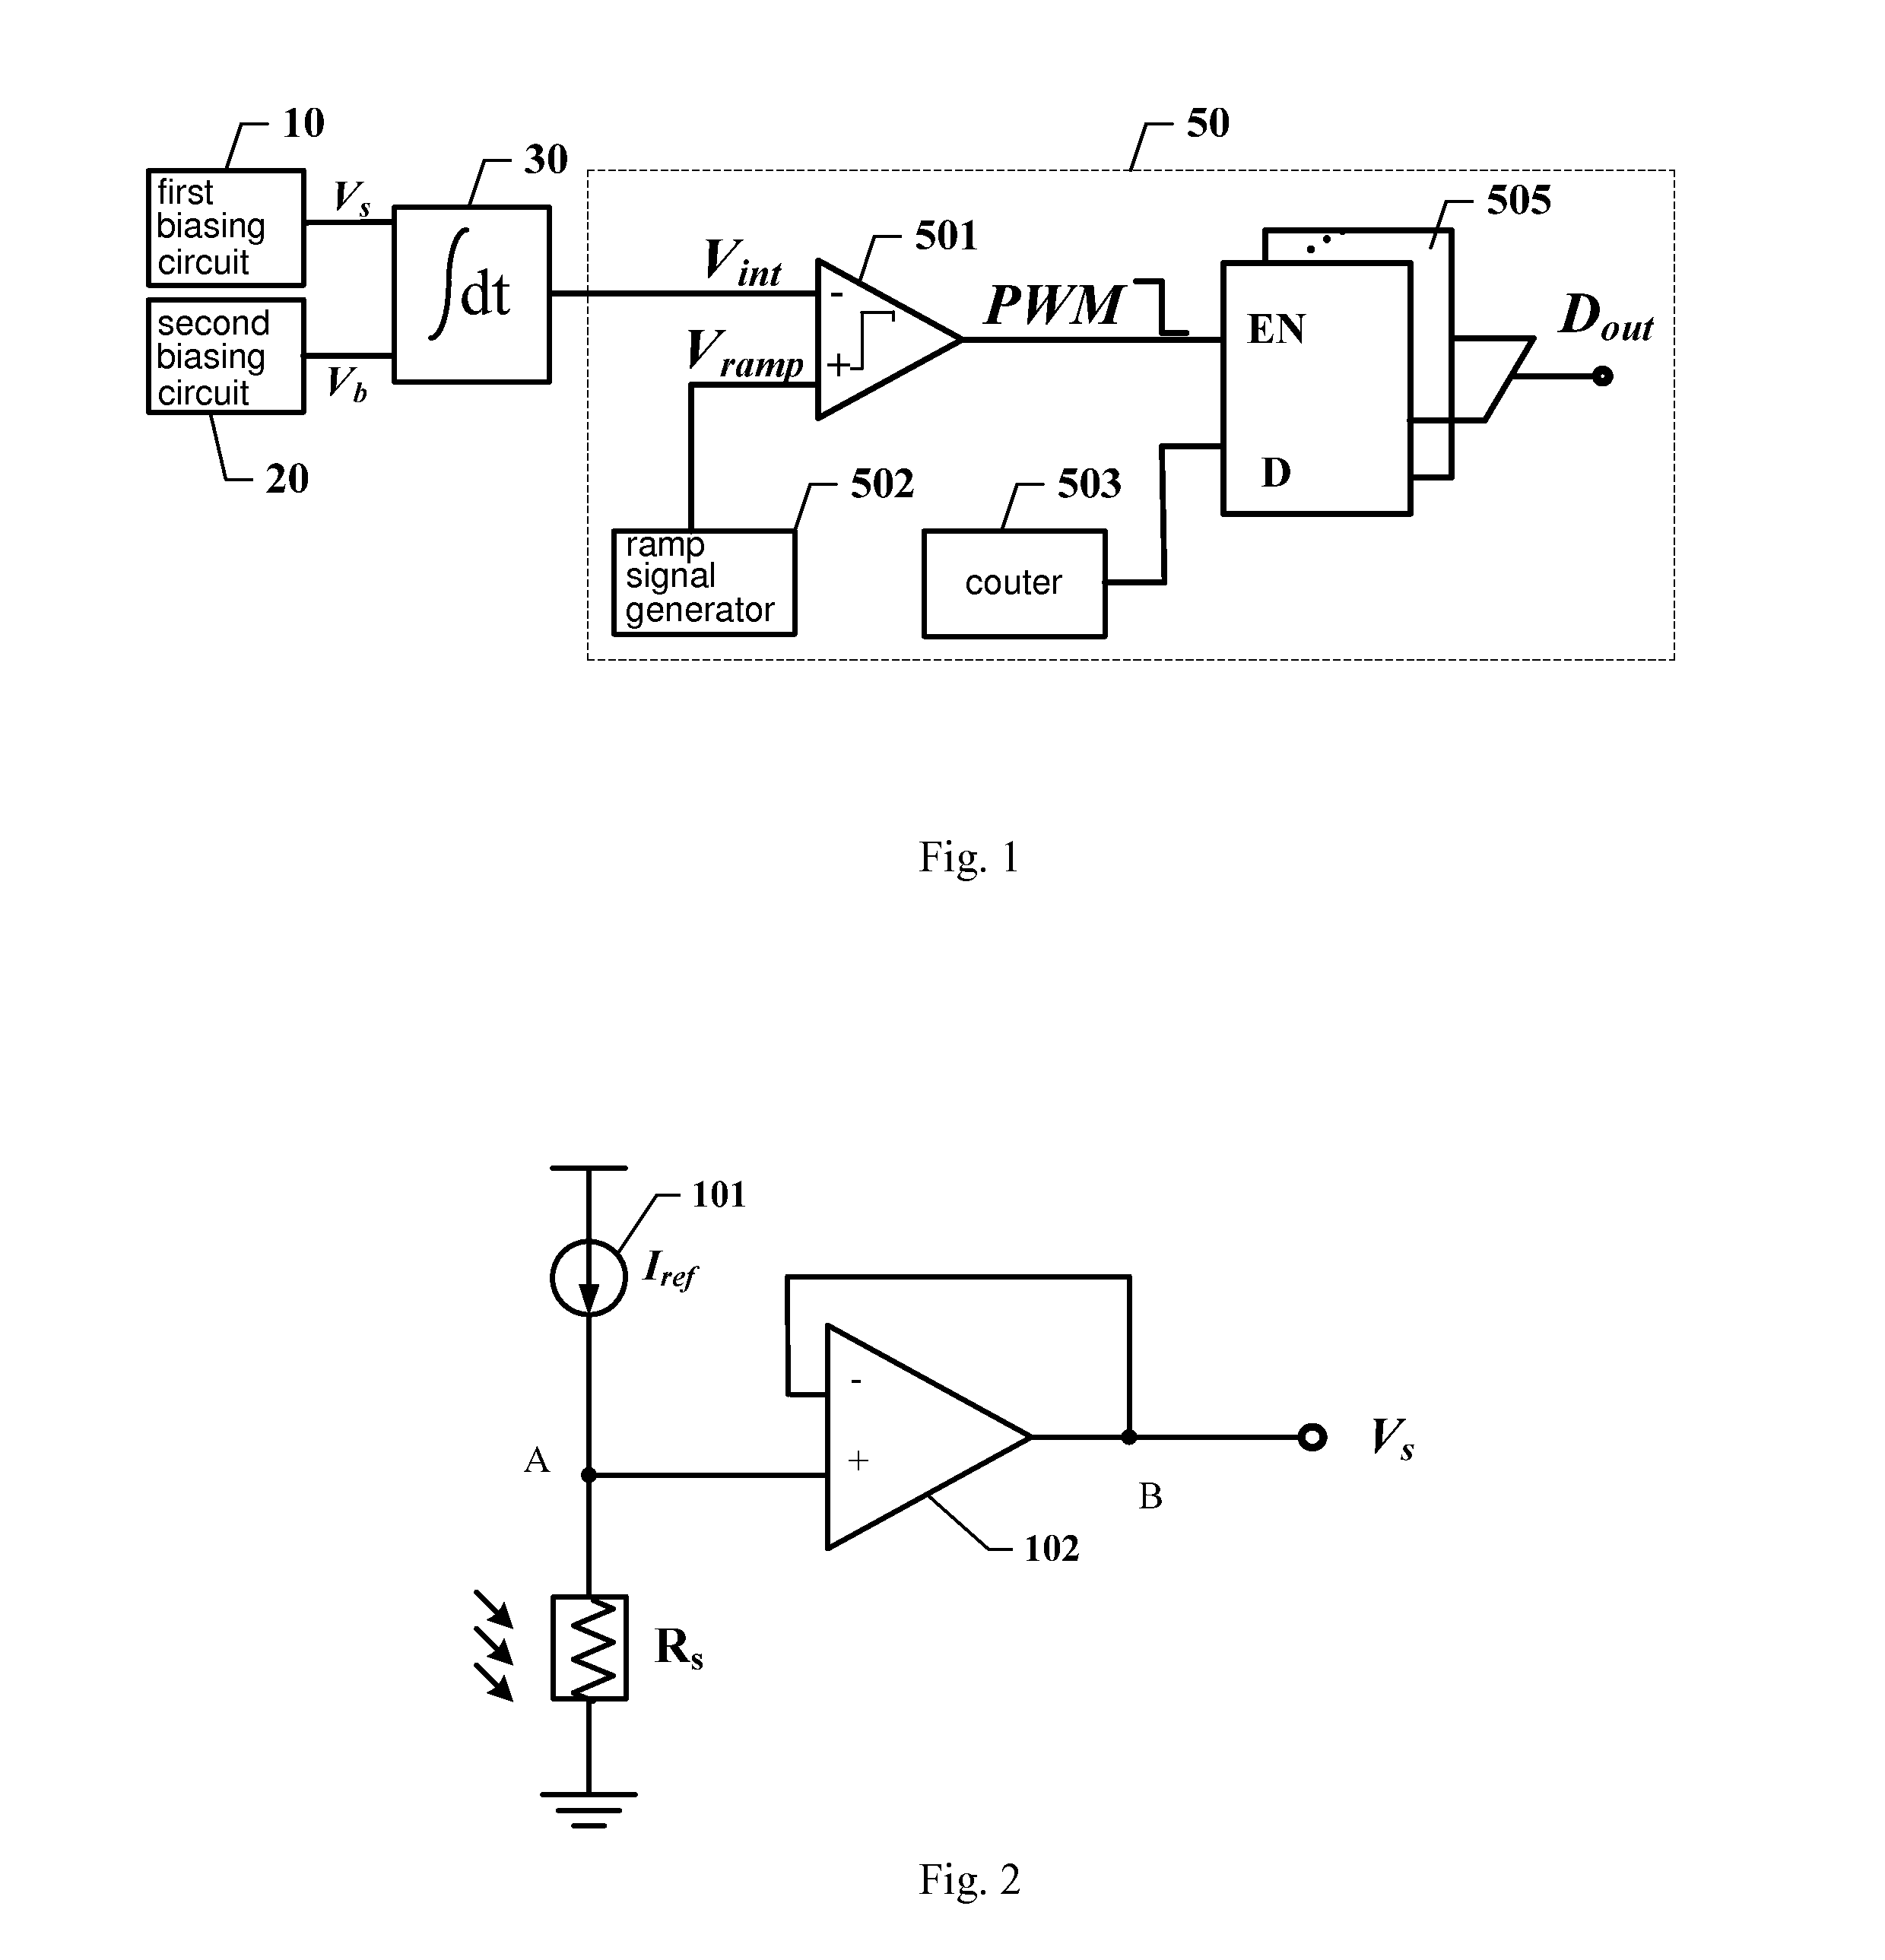 Readout circuit for uncooled infrared focal plane array